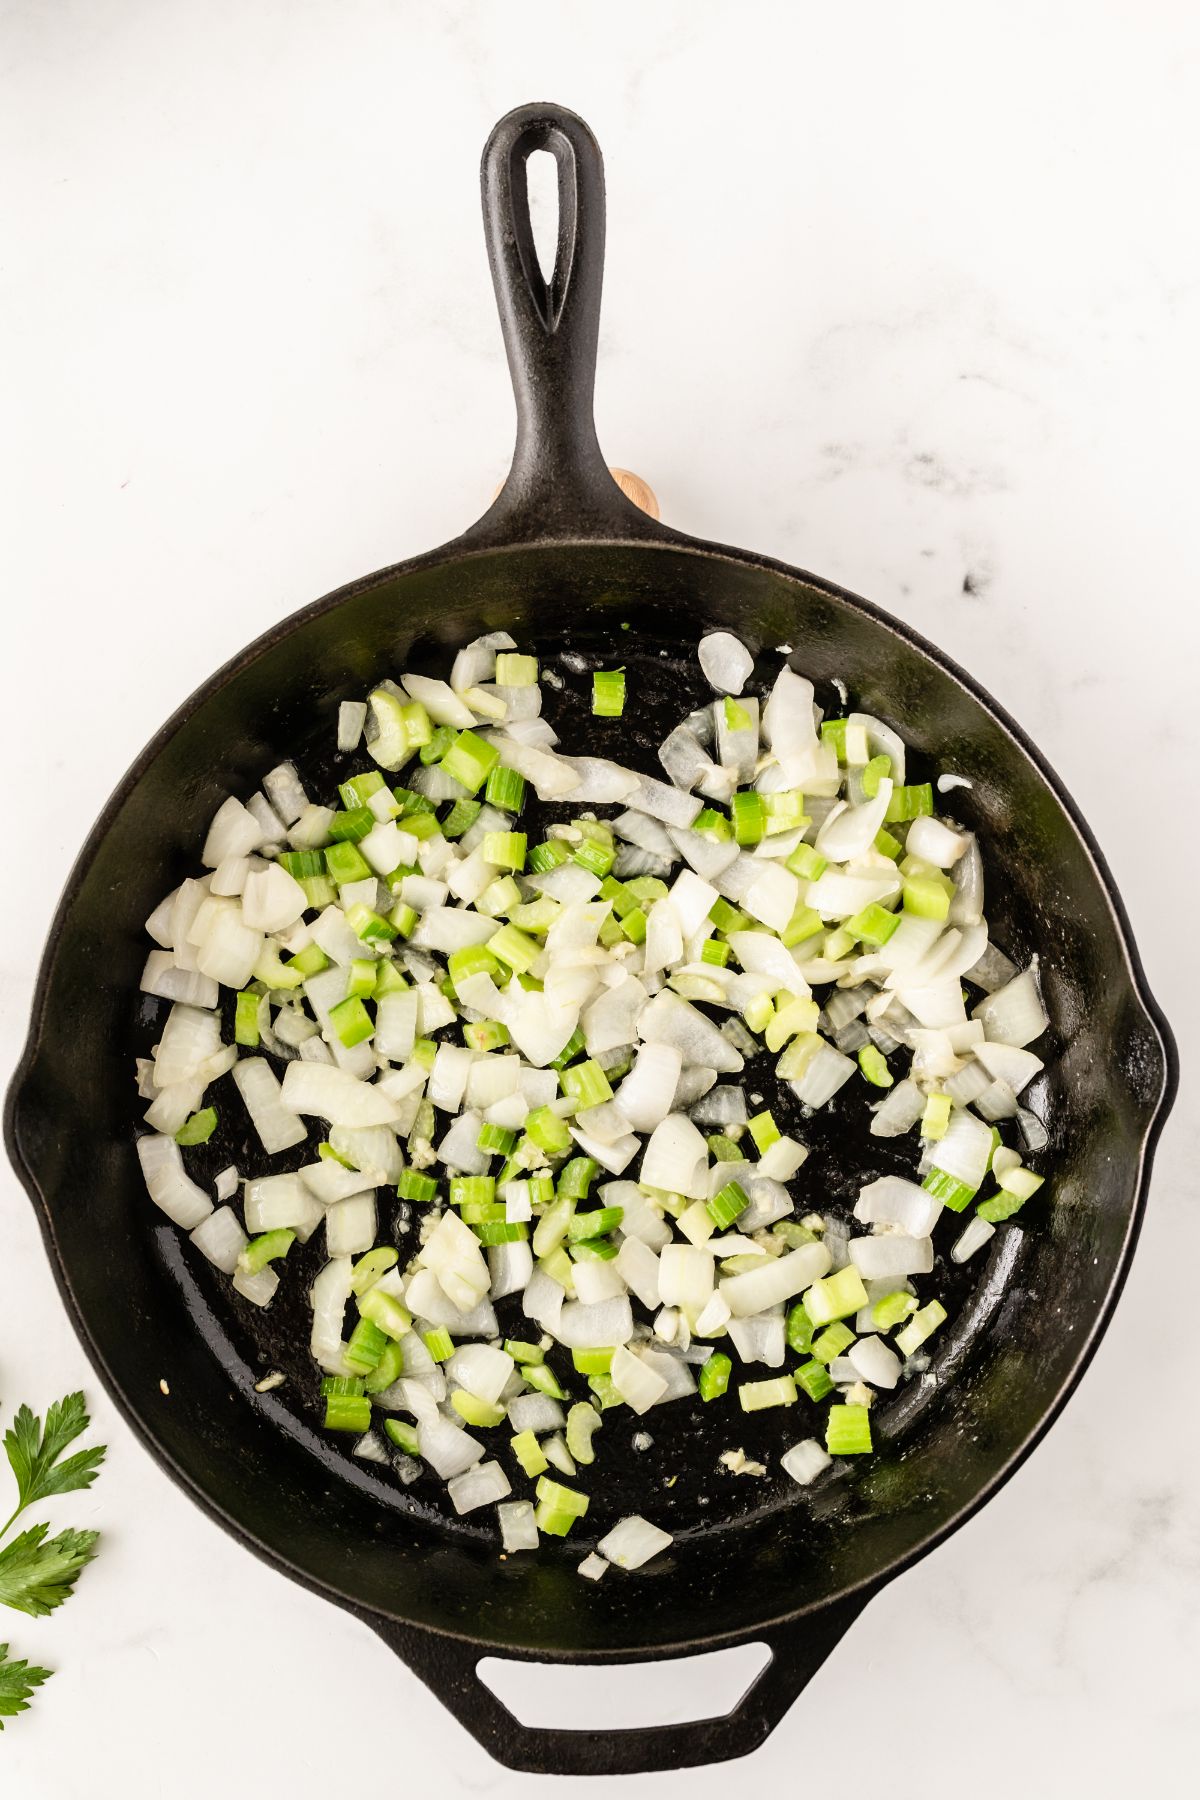 An iron skillet with chopped onion and celery being cooked.